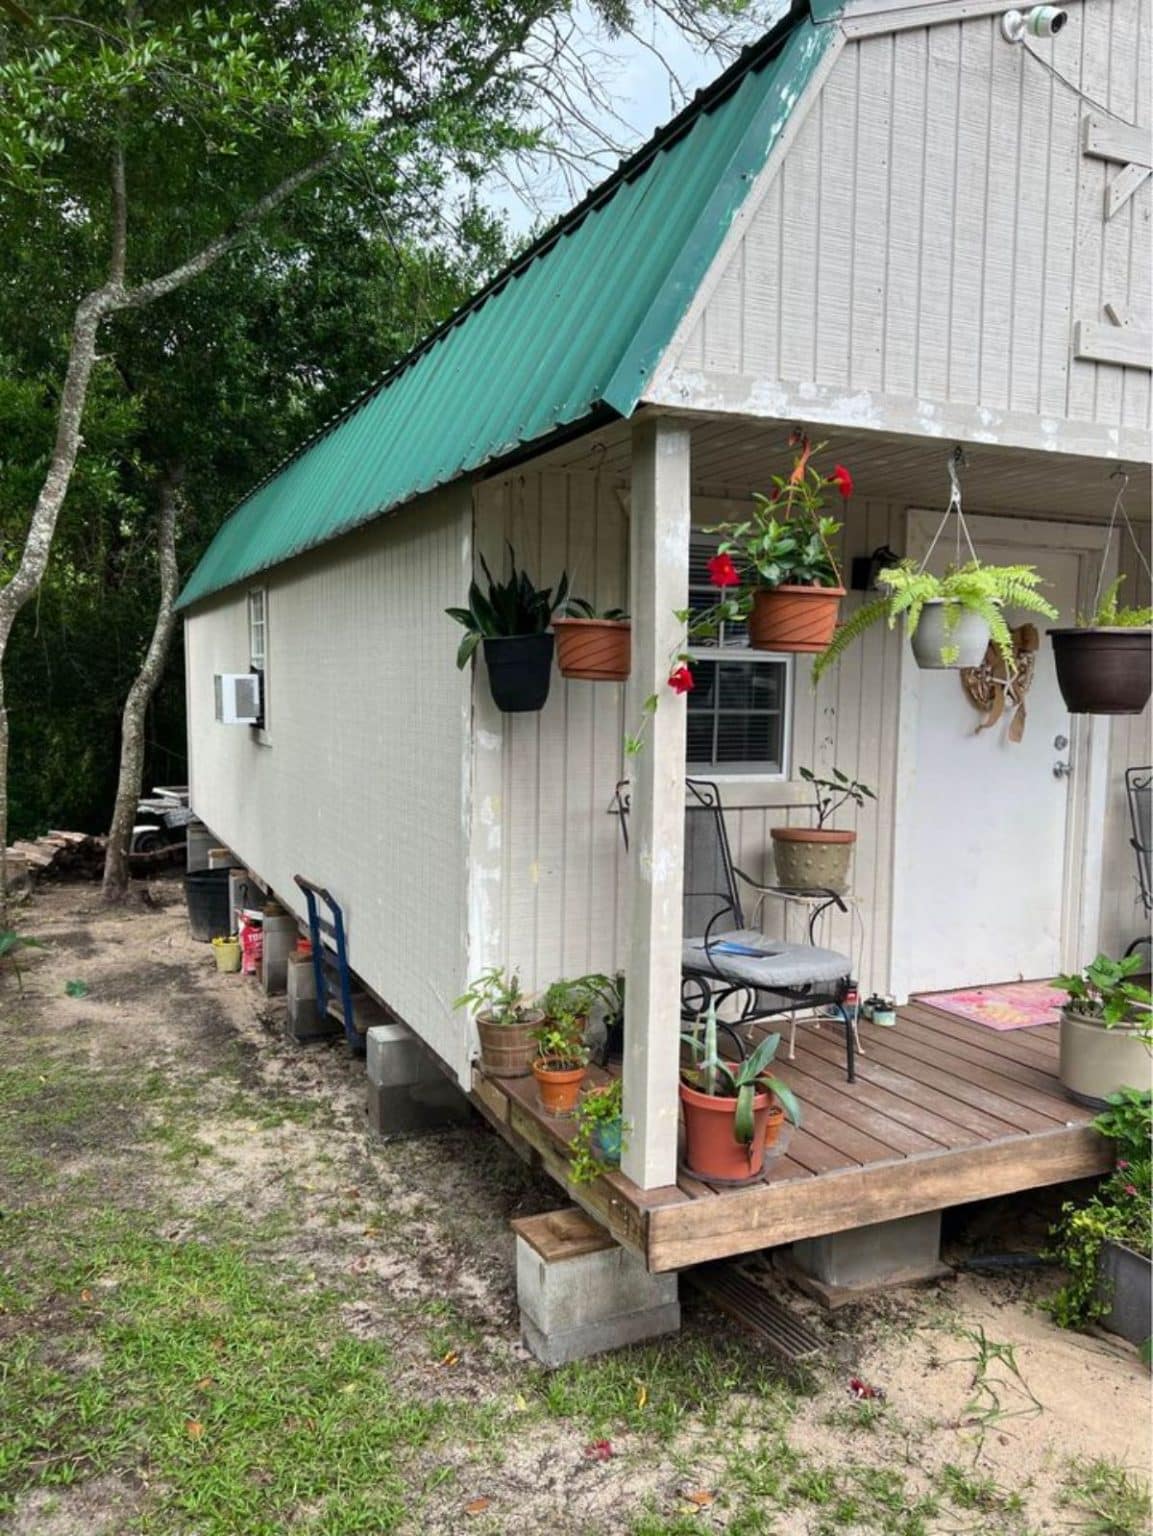 32 Shed Is Now A Tiny Converted Home Priced Just Shy Of 20k  8 1153x1536 